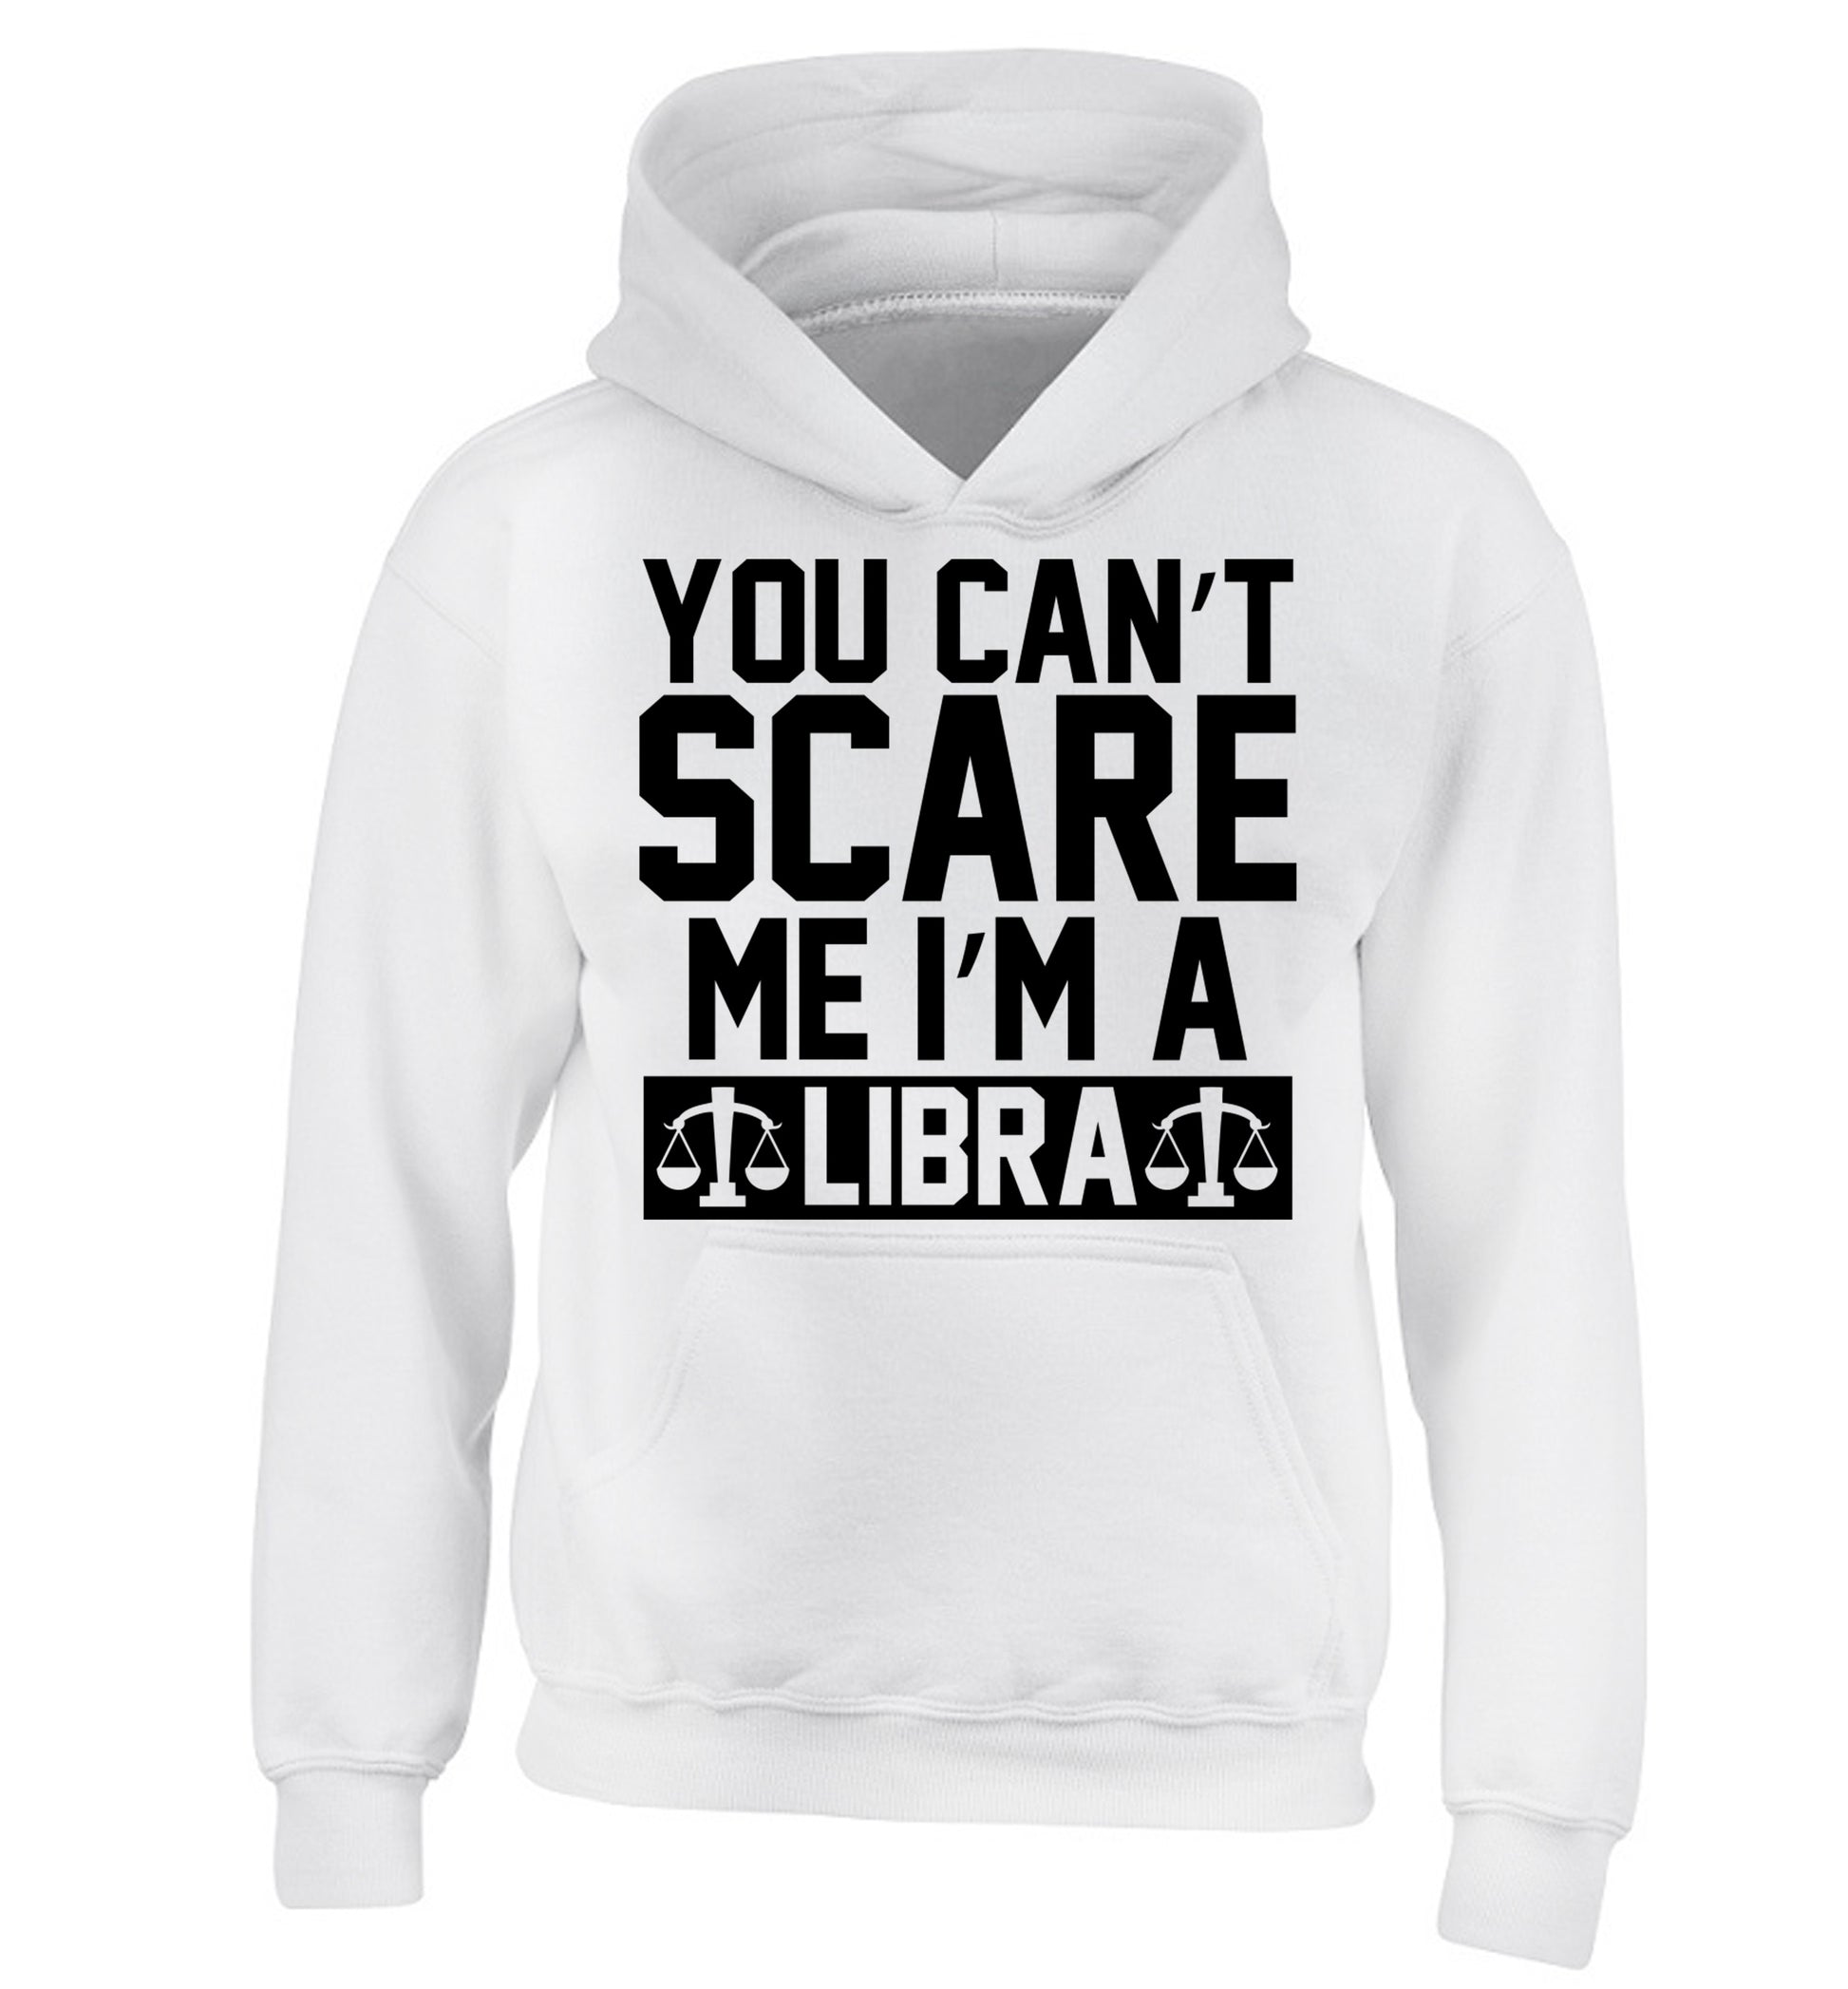 You can't scare me I'm a libra children's white hoodie 12-13 Years